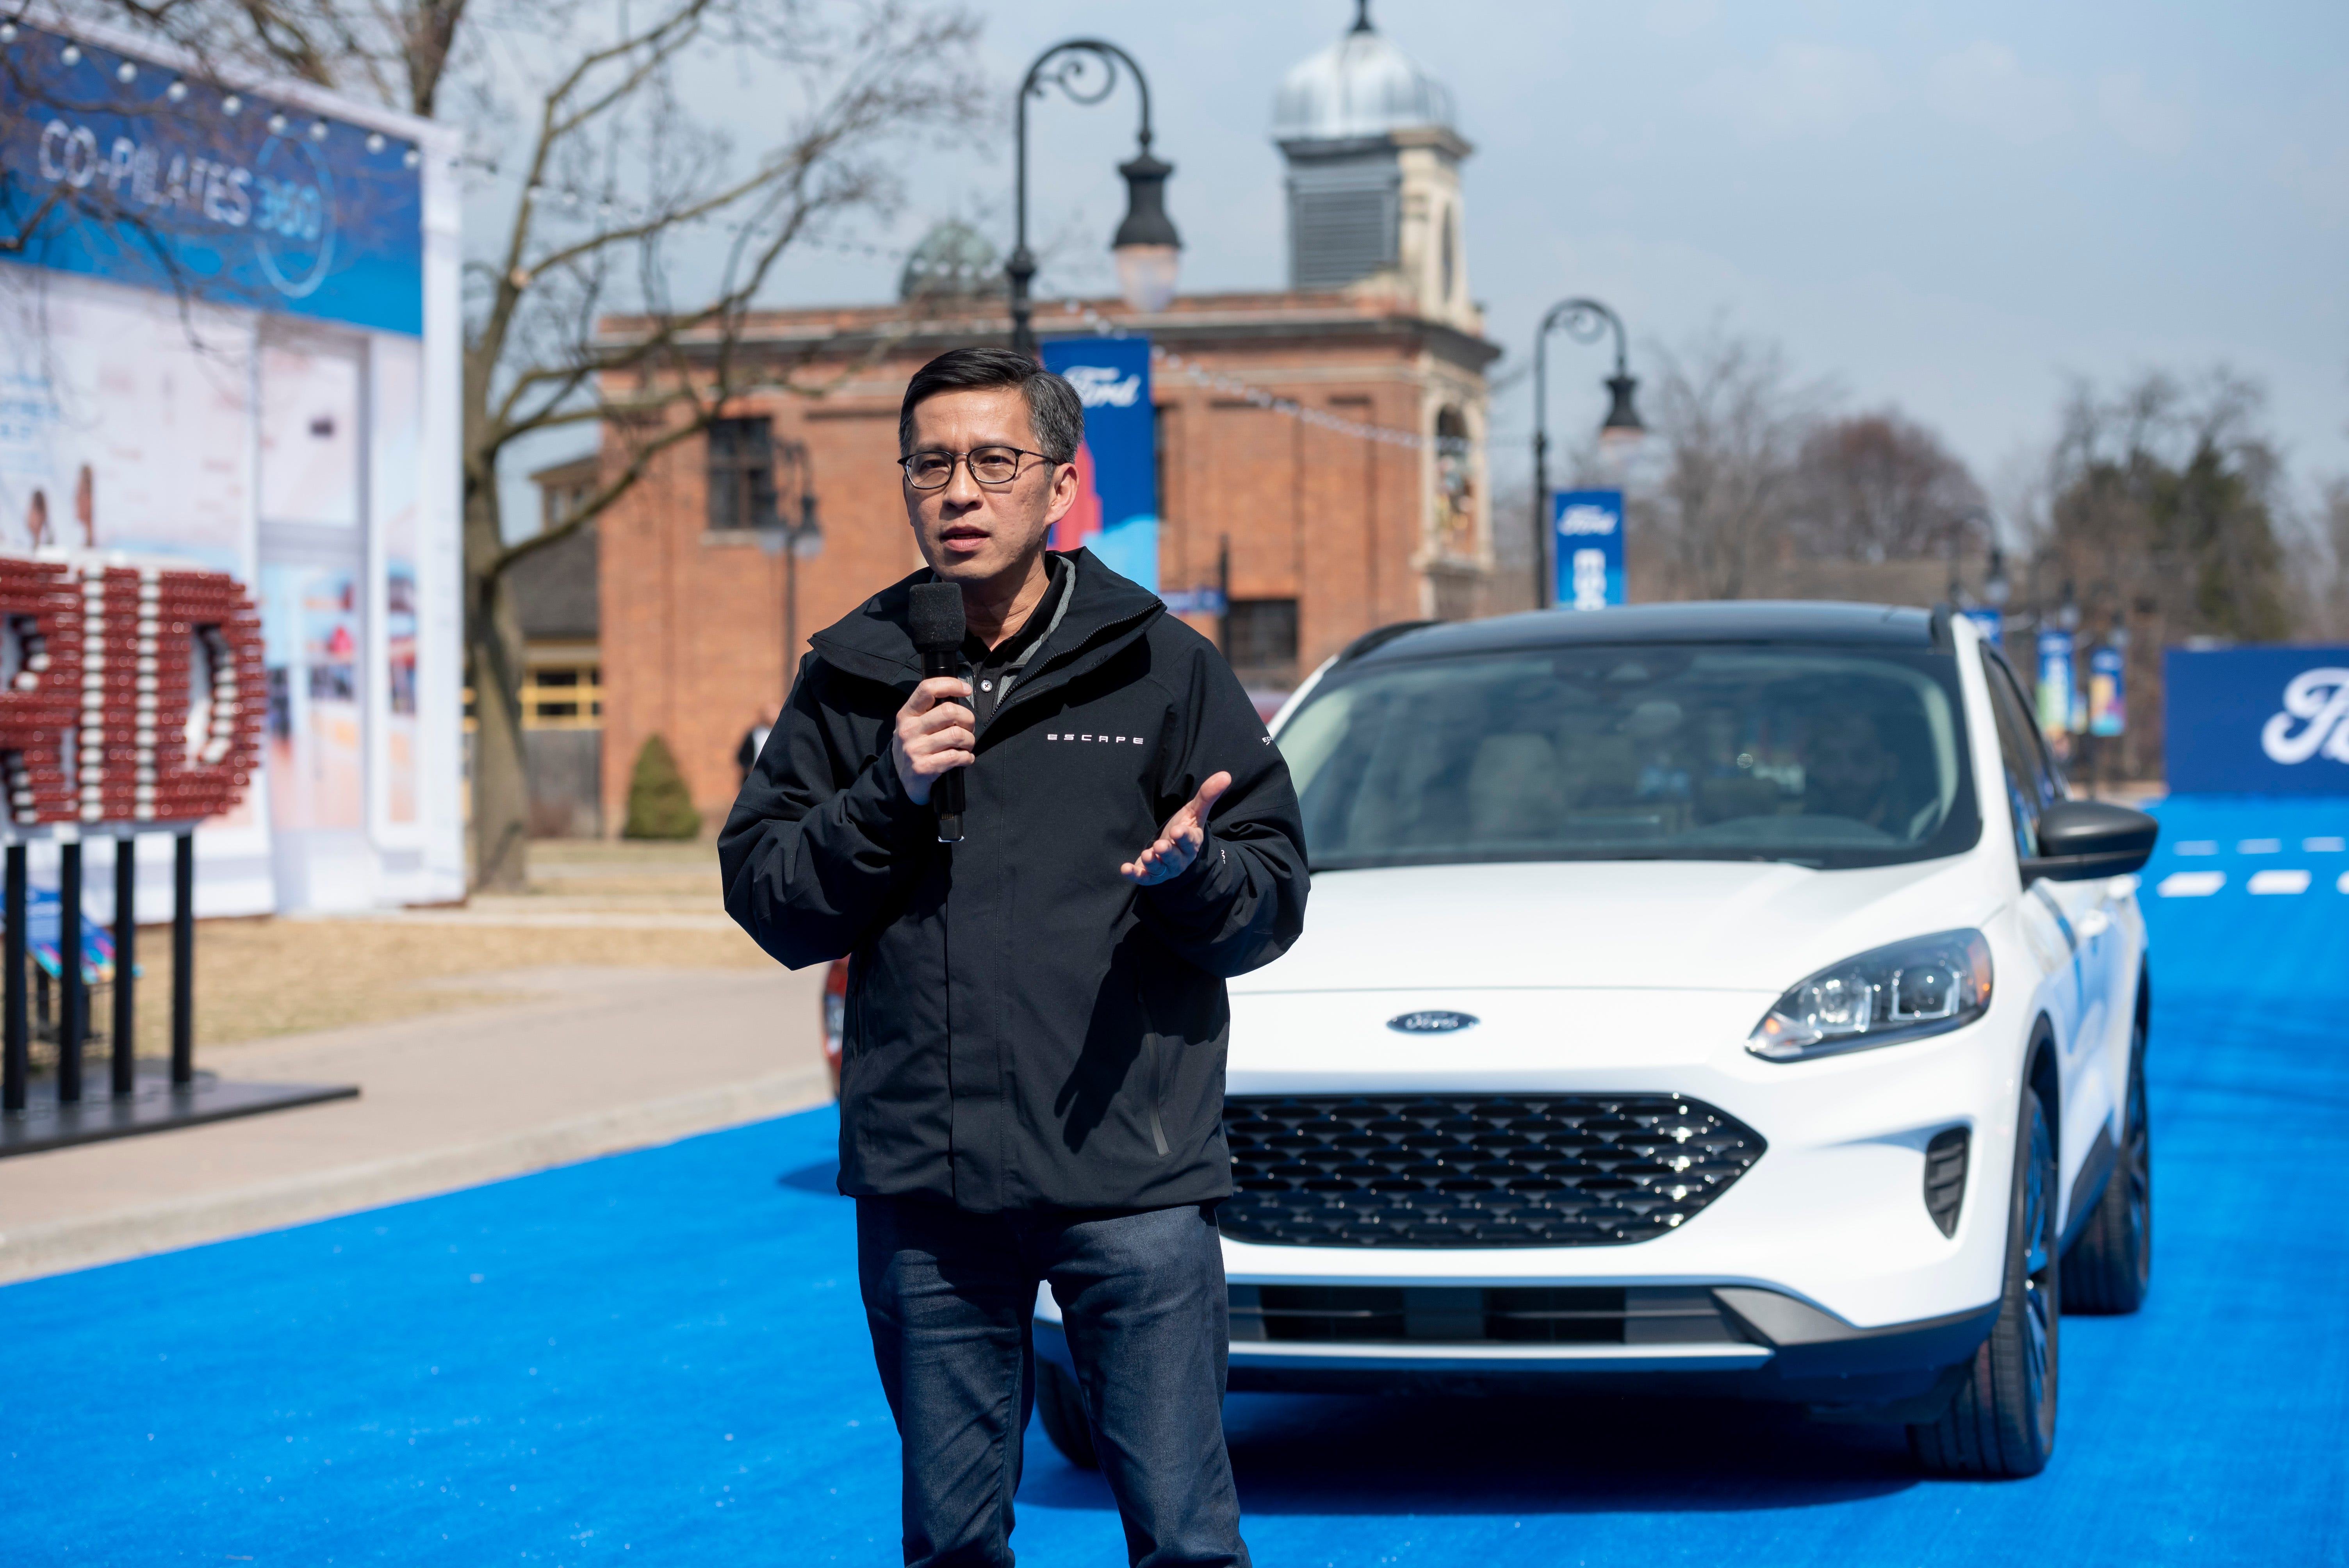 Hau Thai-Tang, Ford's executive vice president of product development and purchasing, speaks during the reveal of the 2020 Ford Escape at Greenfield Village.